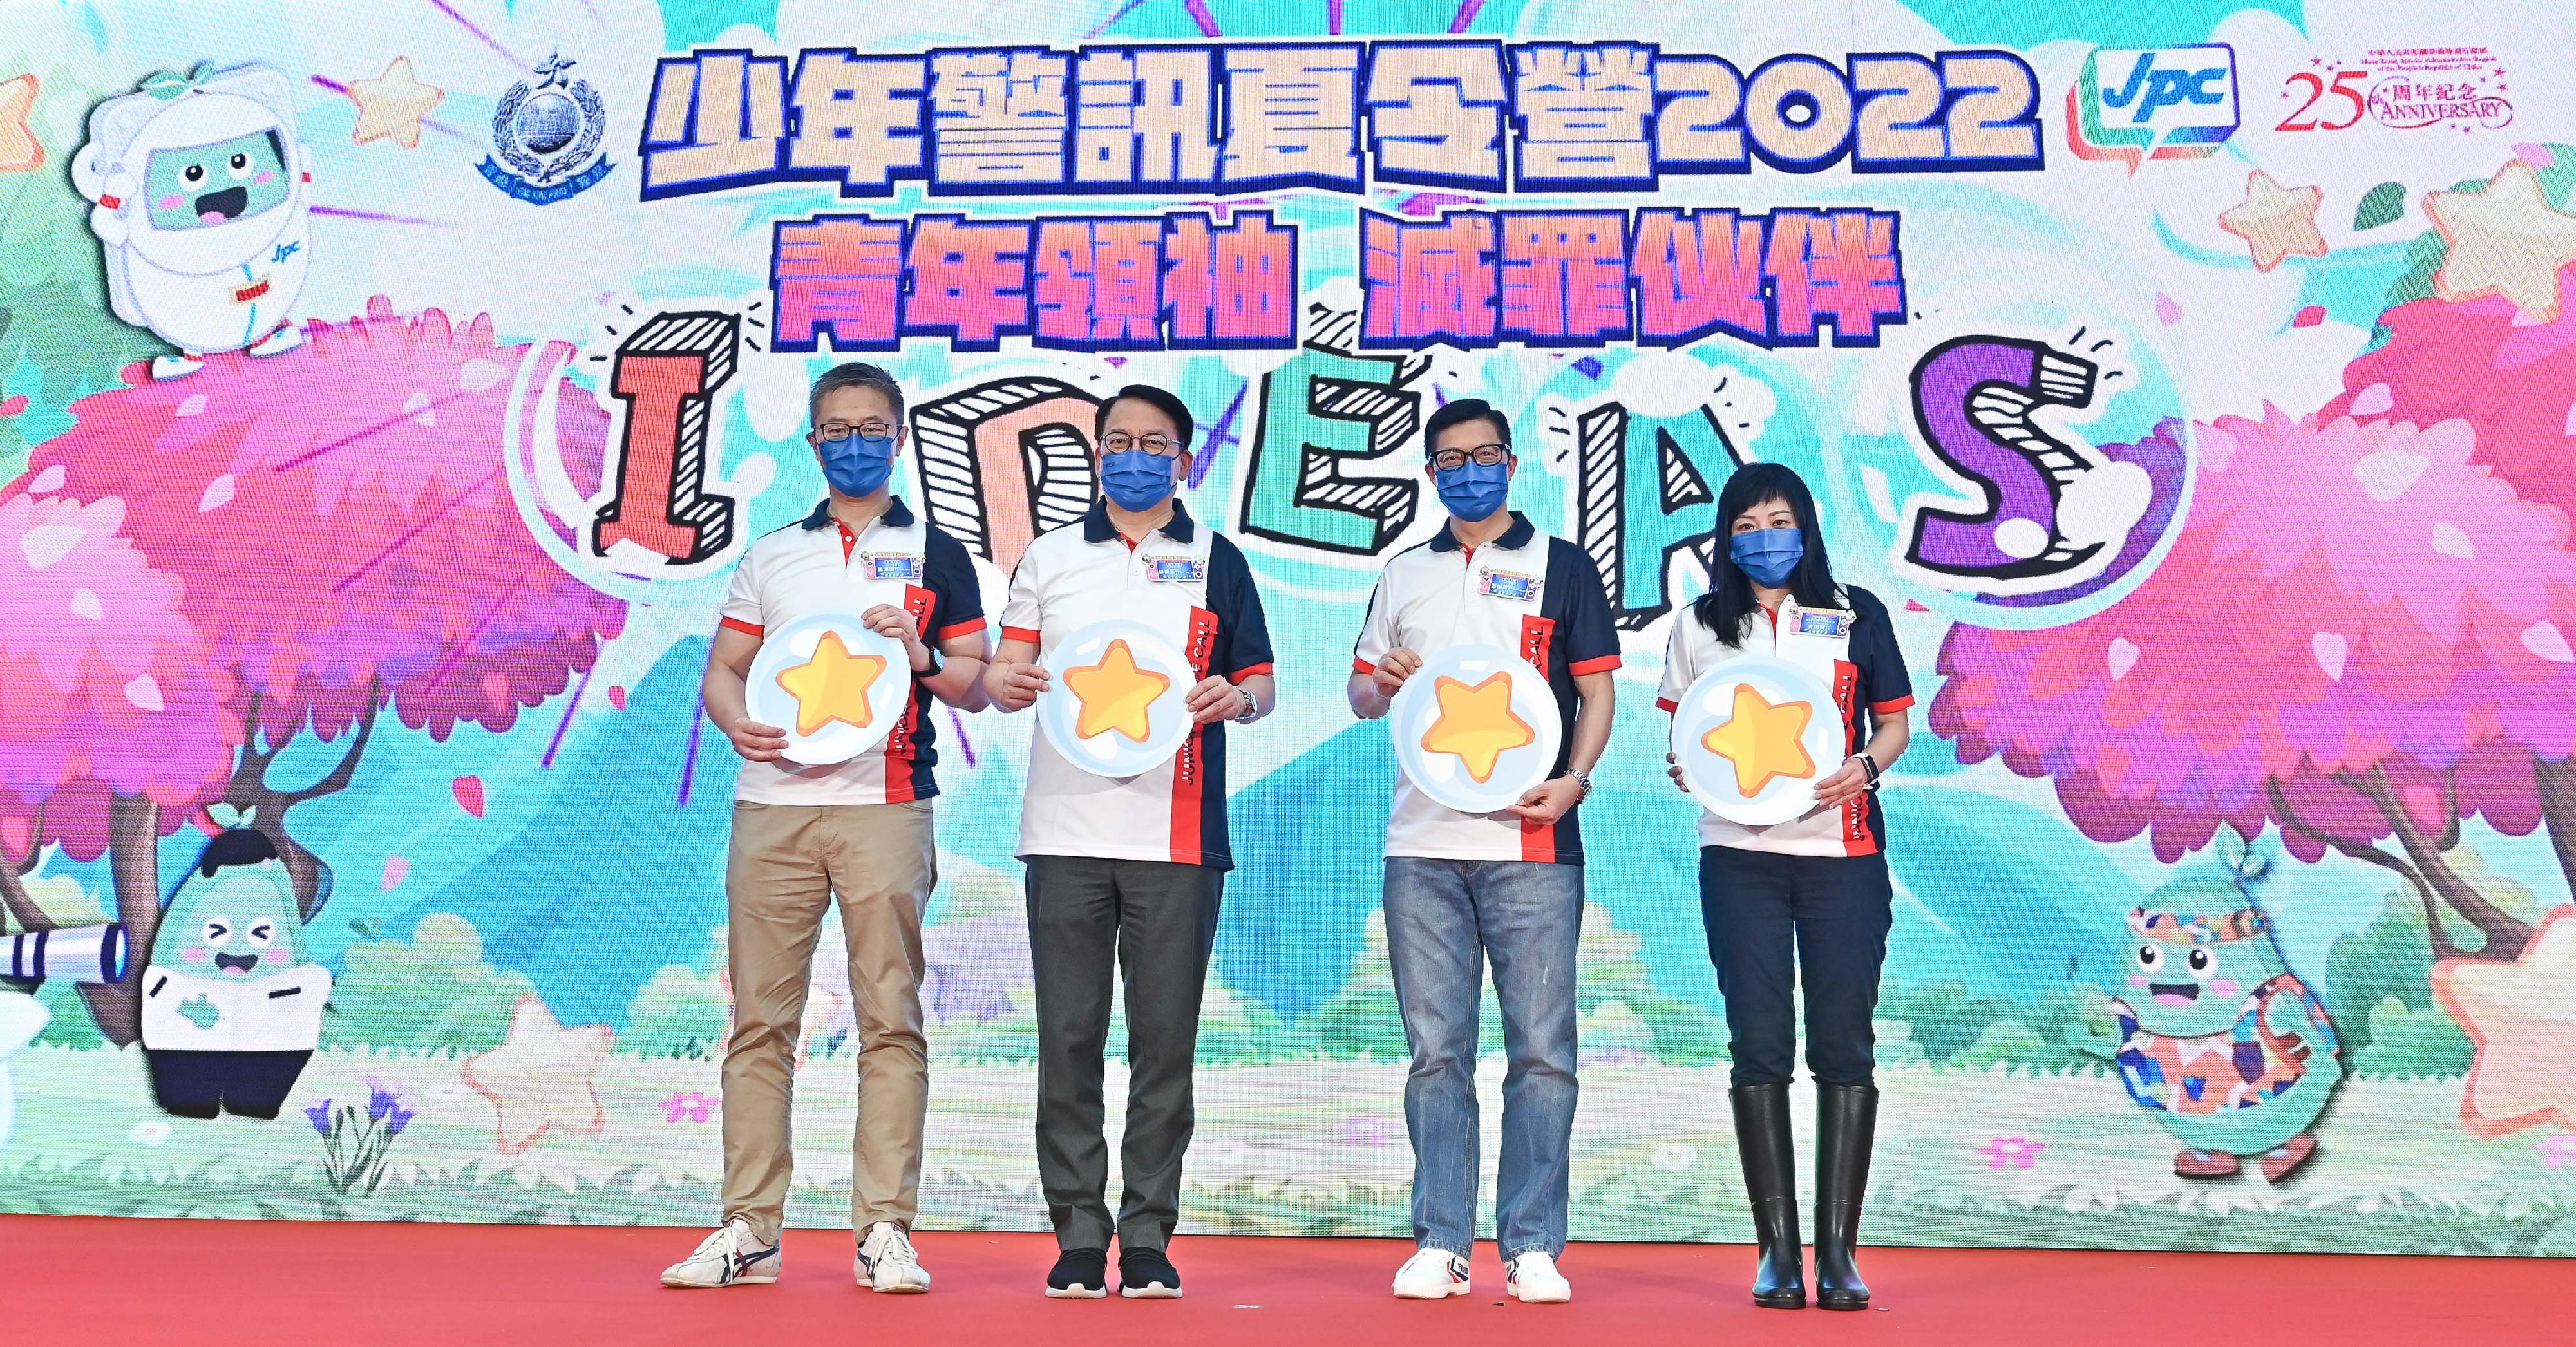 The Chief Secretary for Administration, Mr Chan Kwok-ki (second left); the Secretary for Security, Mr Tang Ping-keung (second right); the Commissioner of Police, Mr Siu Chak-yee (first left); and the Chief Superintendent of Police, Public Relations Wing, Ms Tsang Shuk-yin (first right), officiated at the Opening Ceremony of Junior Police Call Summer Camp 2022 today (August 16).